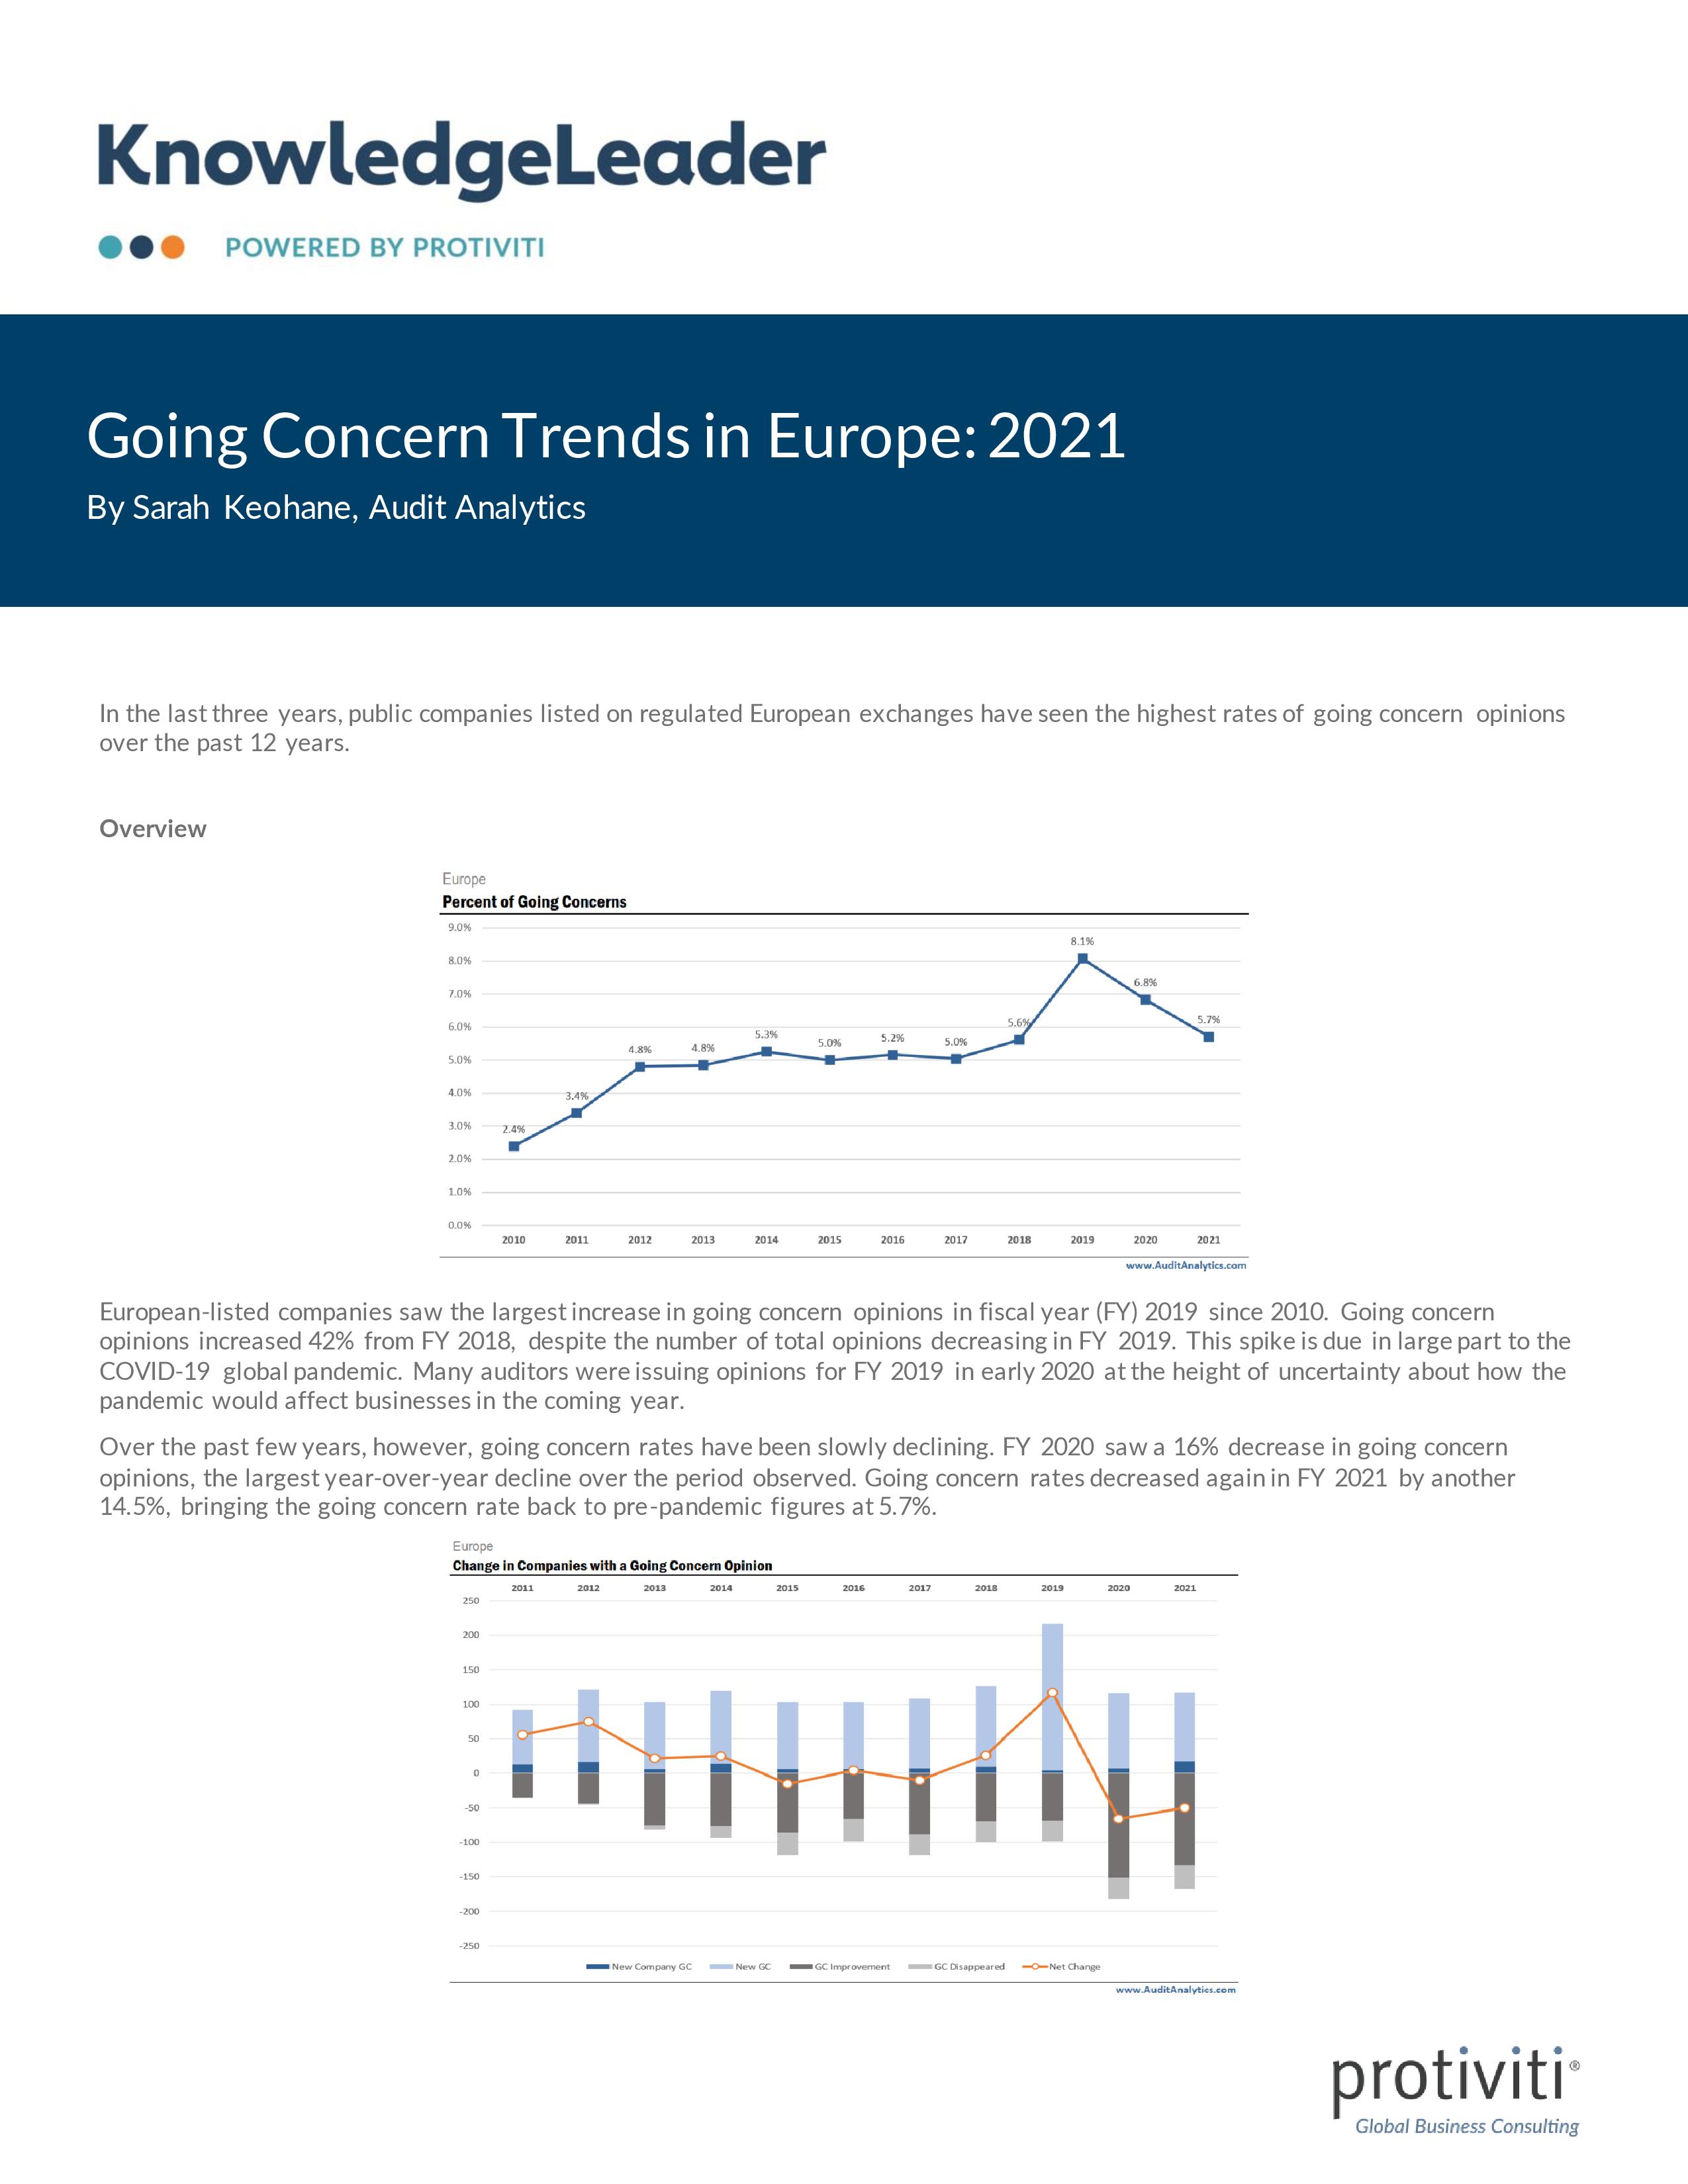 Screenshot of the first page of Going Concern Trends in Europe 2021